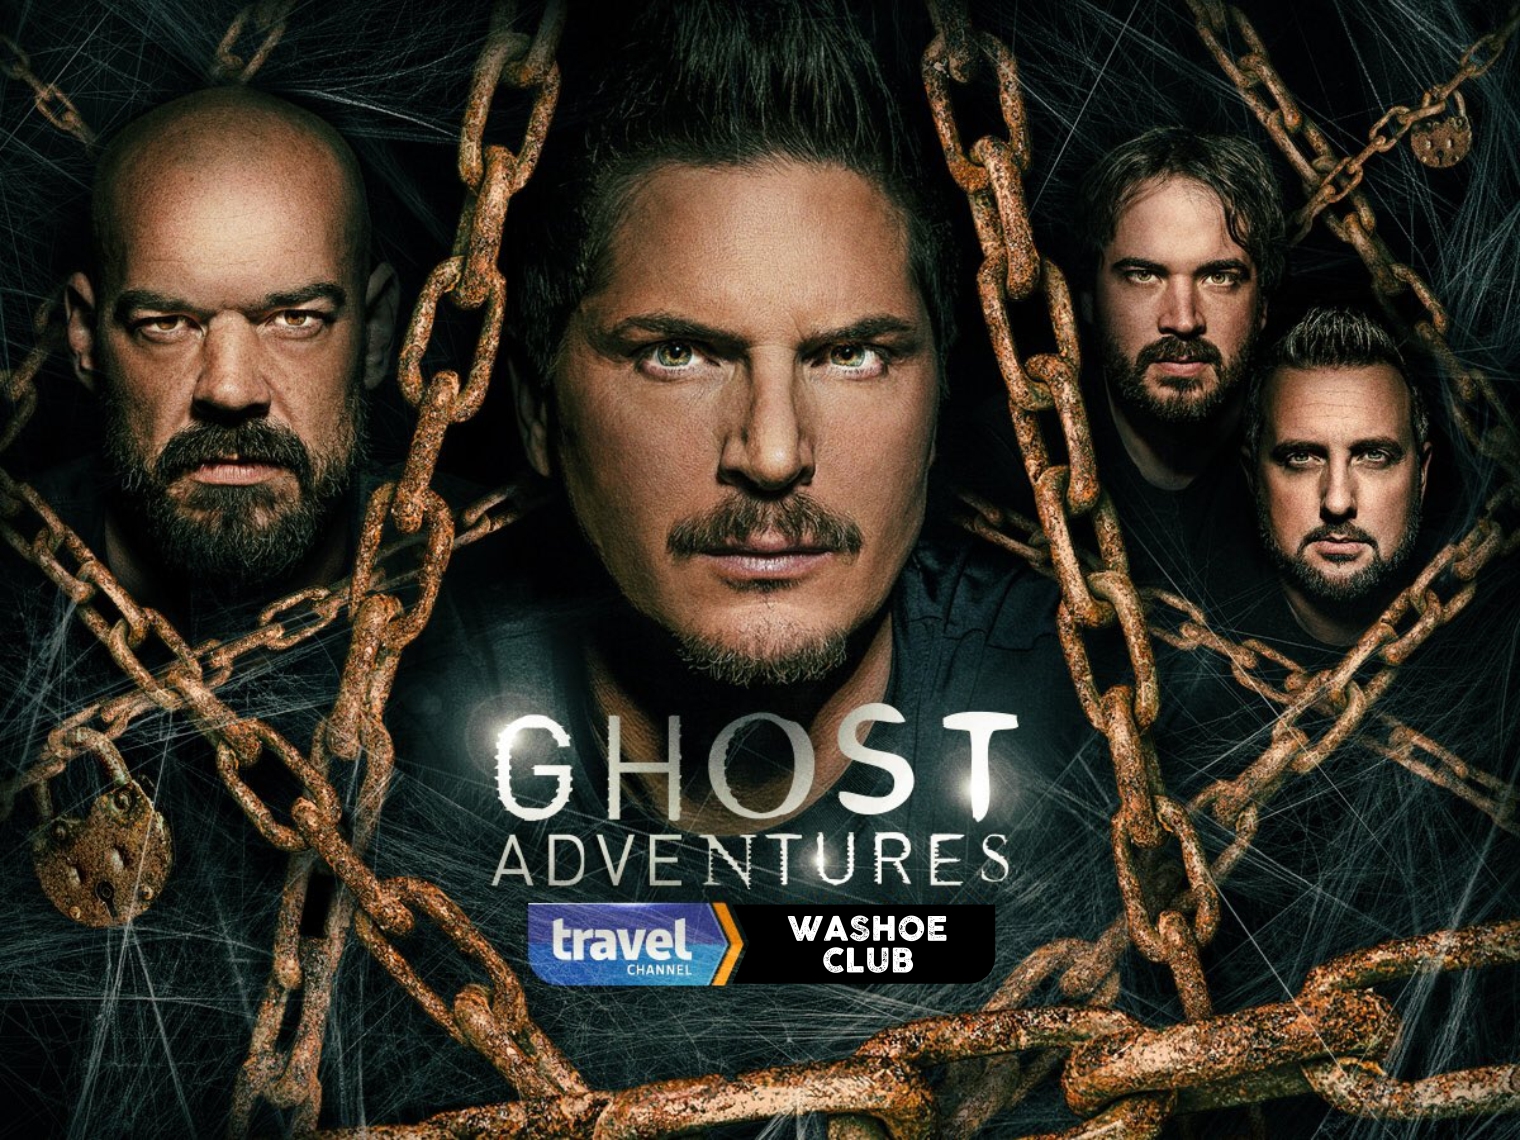 Ghost Adventures — The Washoe Club